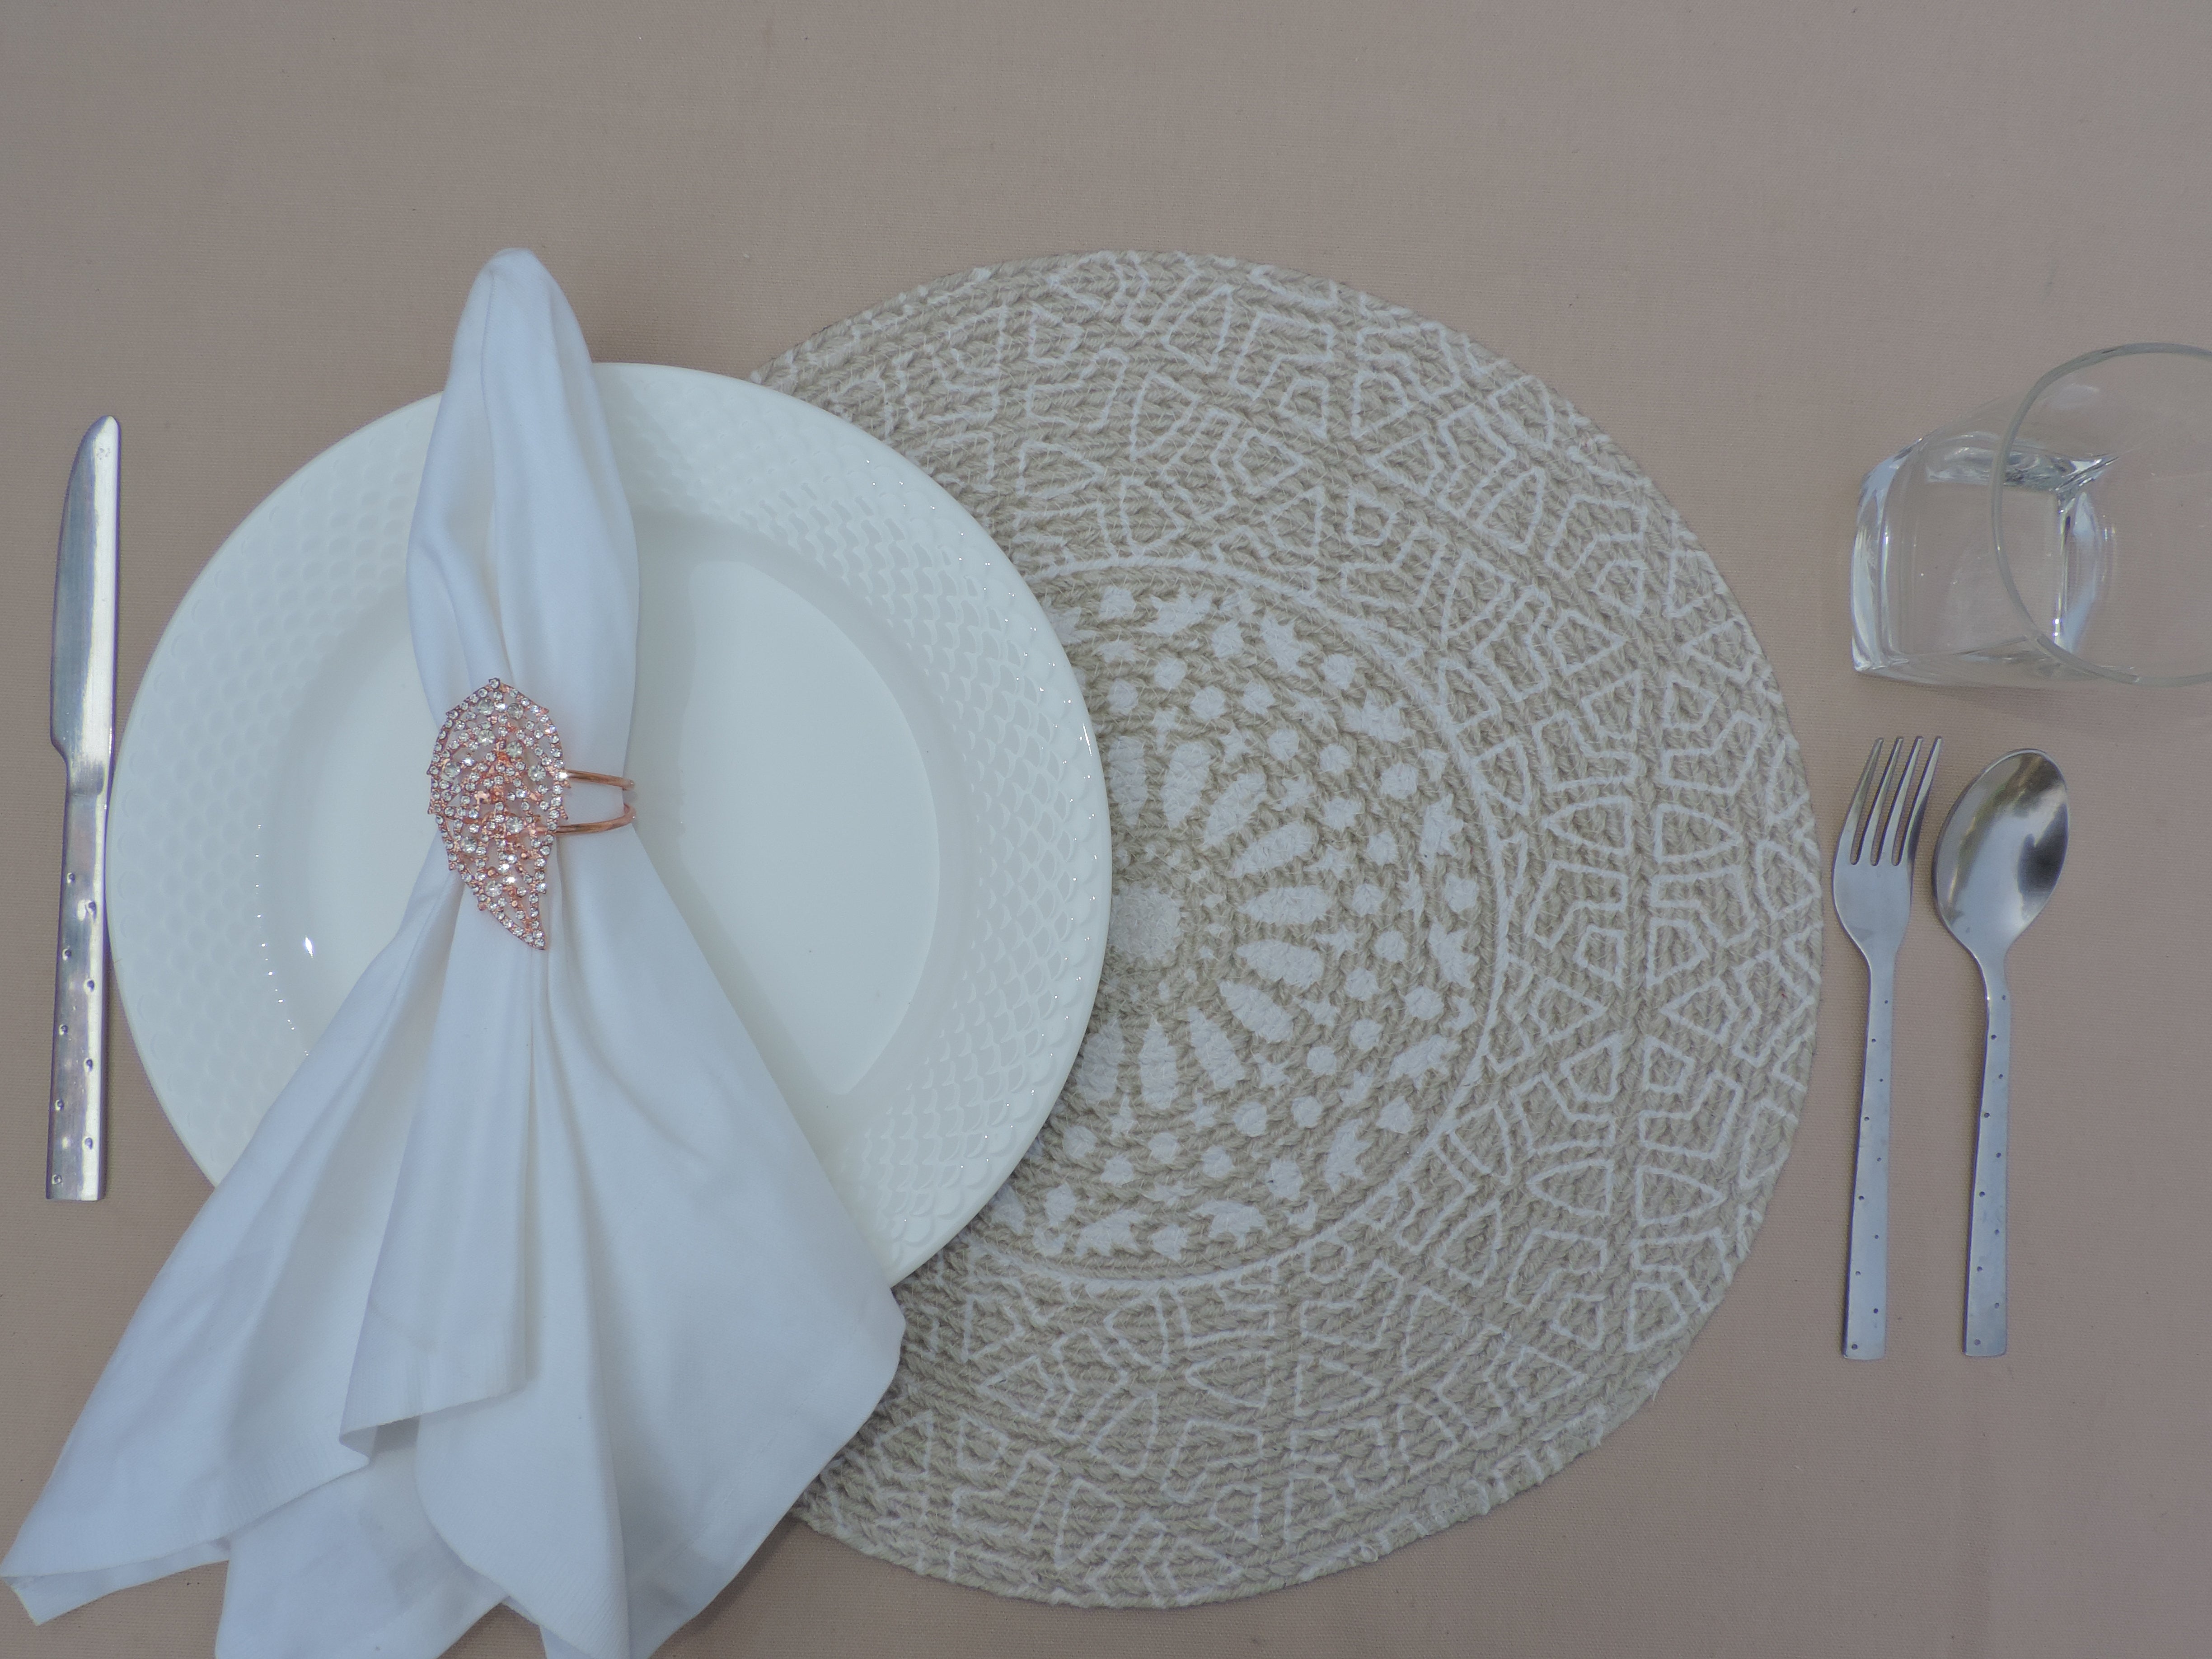 Jute Placemats, Chargers / Set of 2 / 15 in. Round/ Grey with White